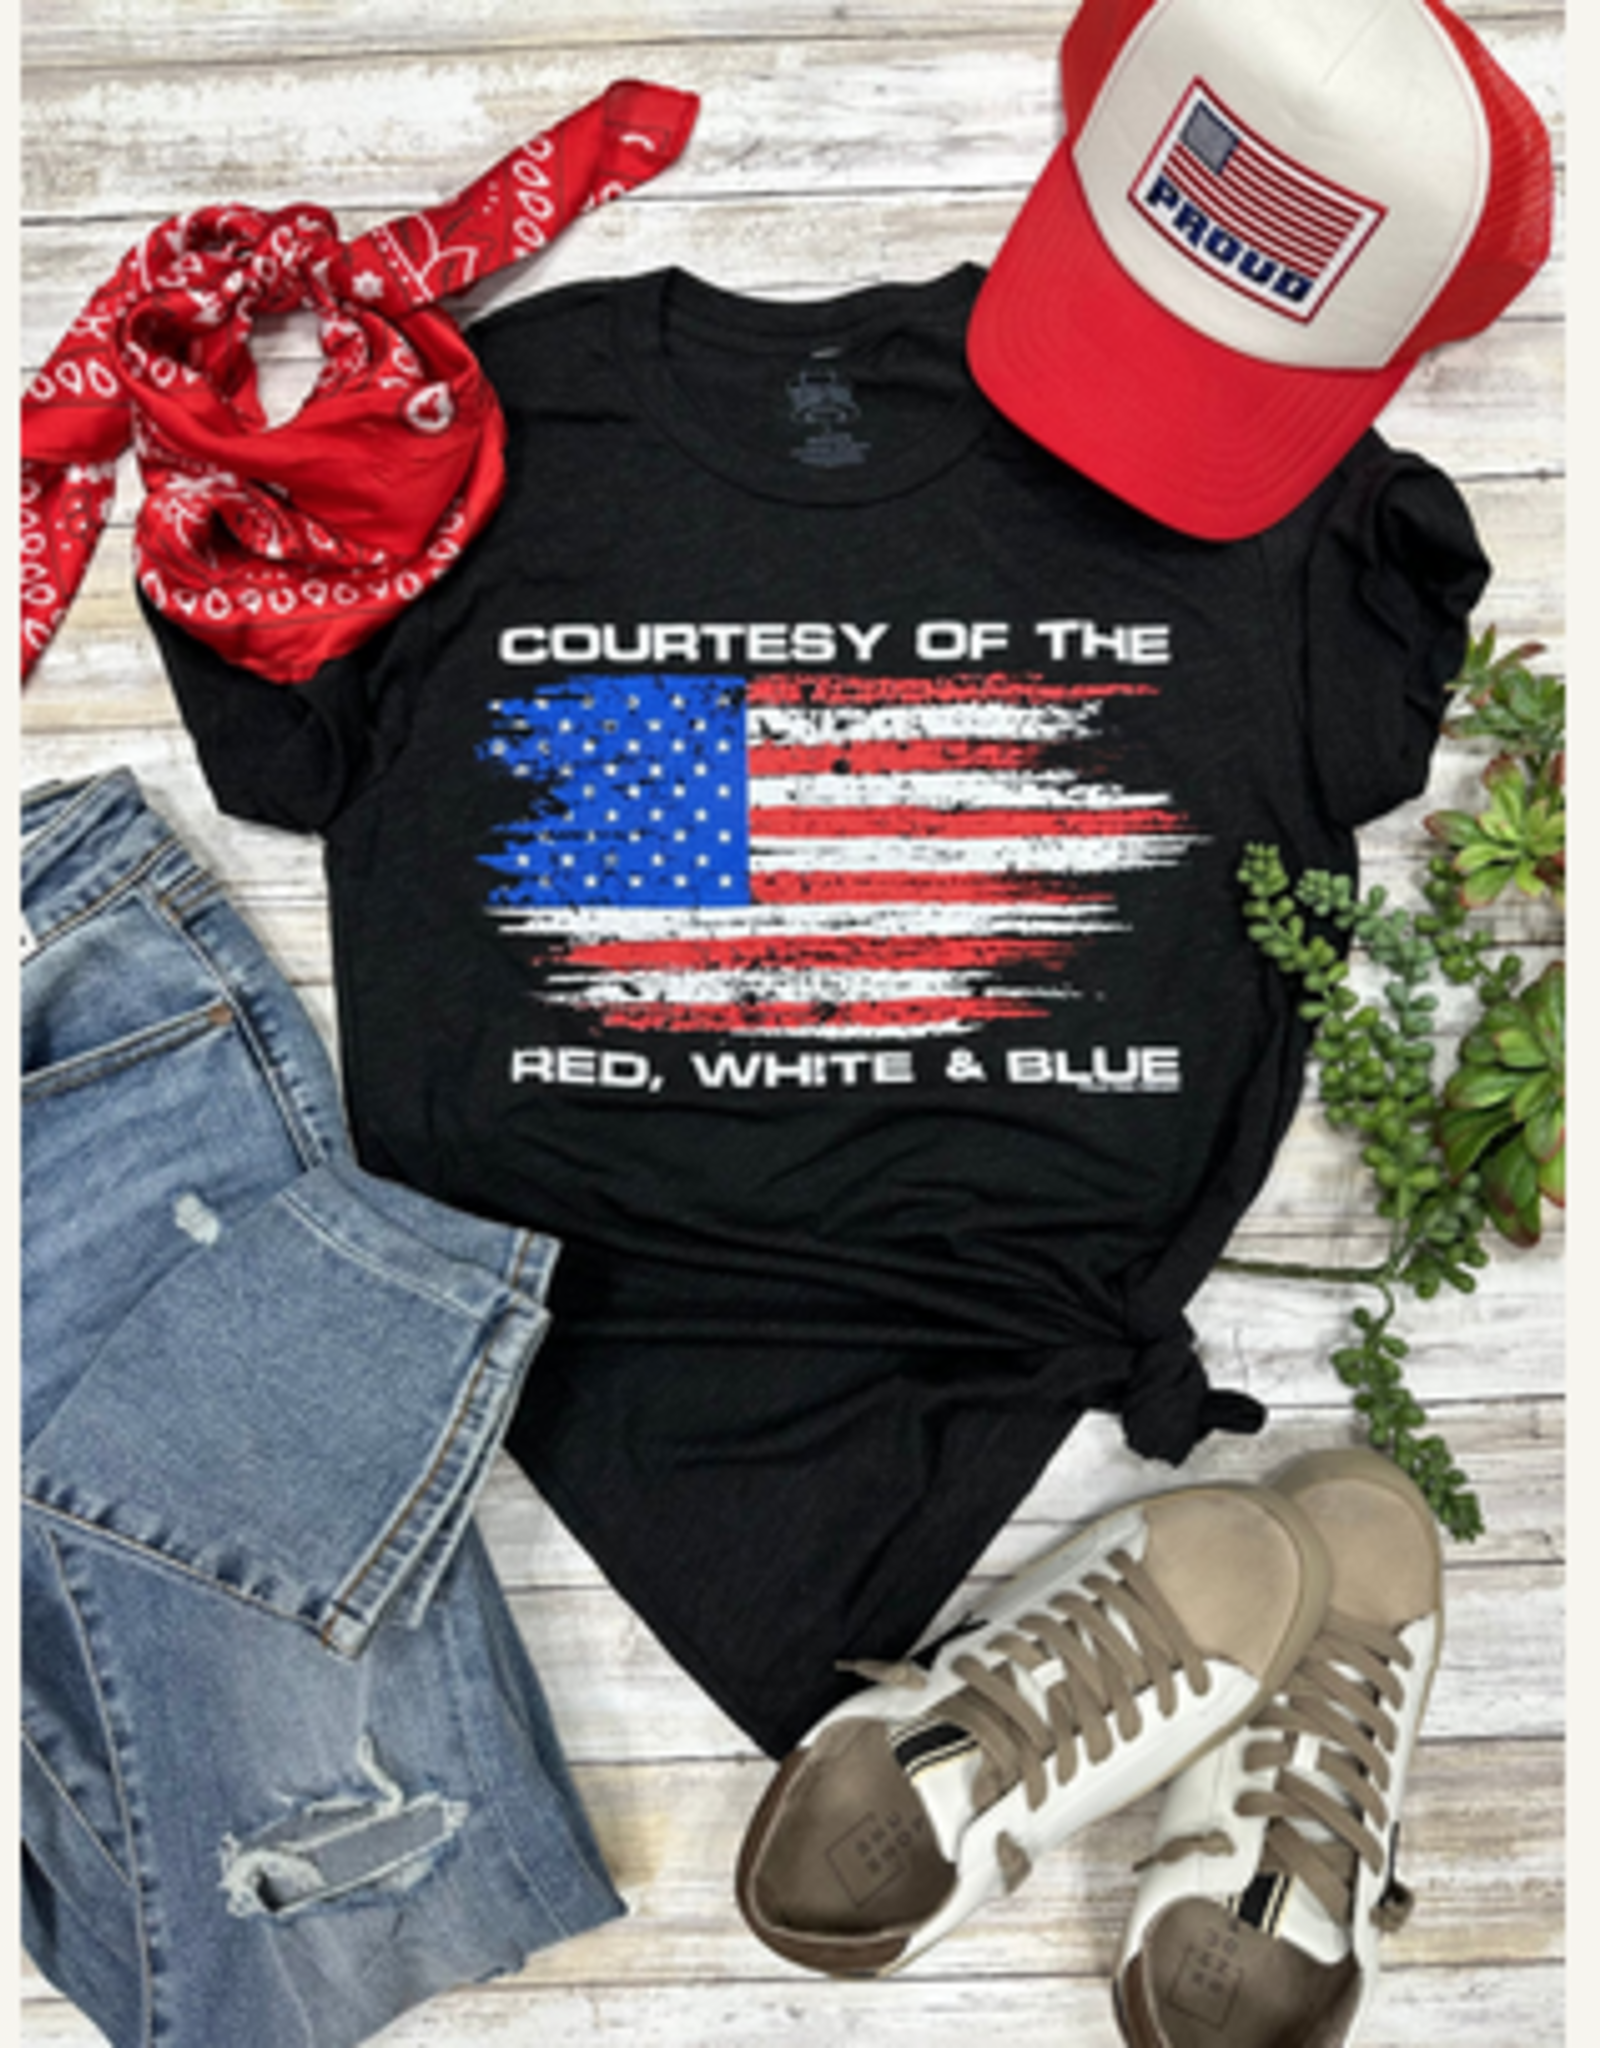 SHIRT UNISEX "COURTSEY OF RED,WHIT,BLU"